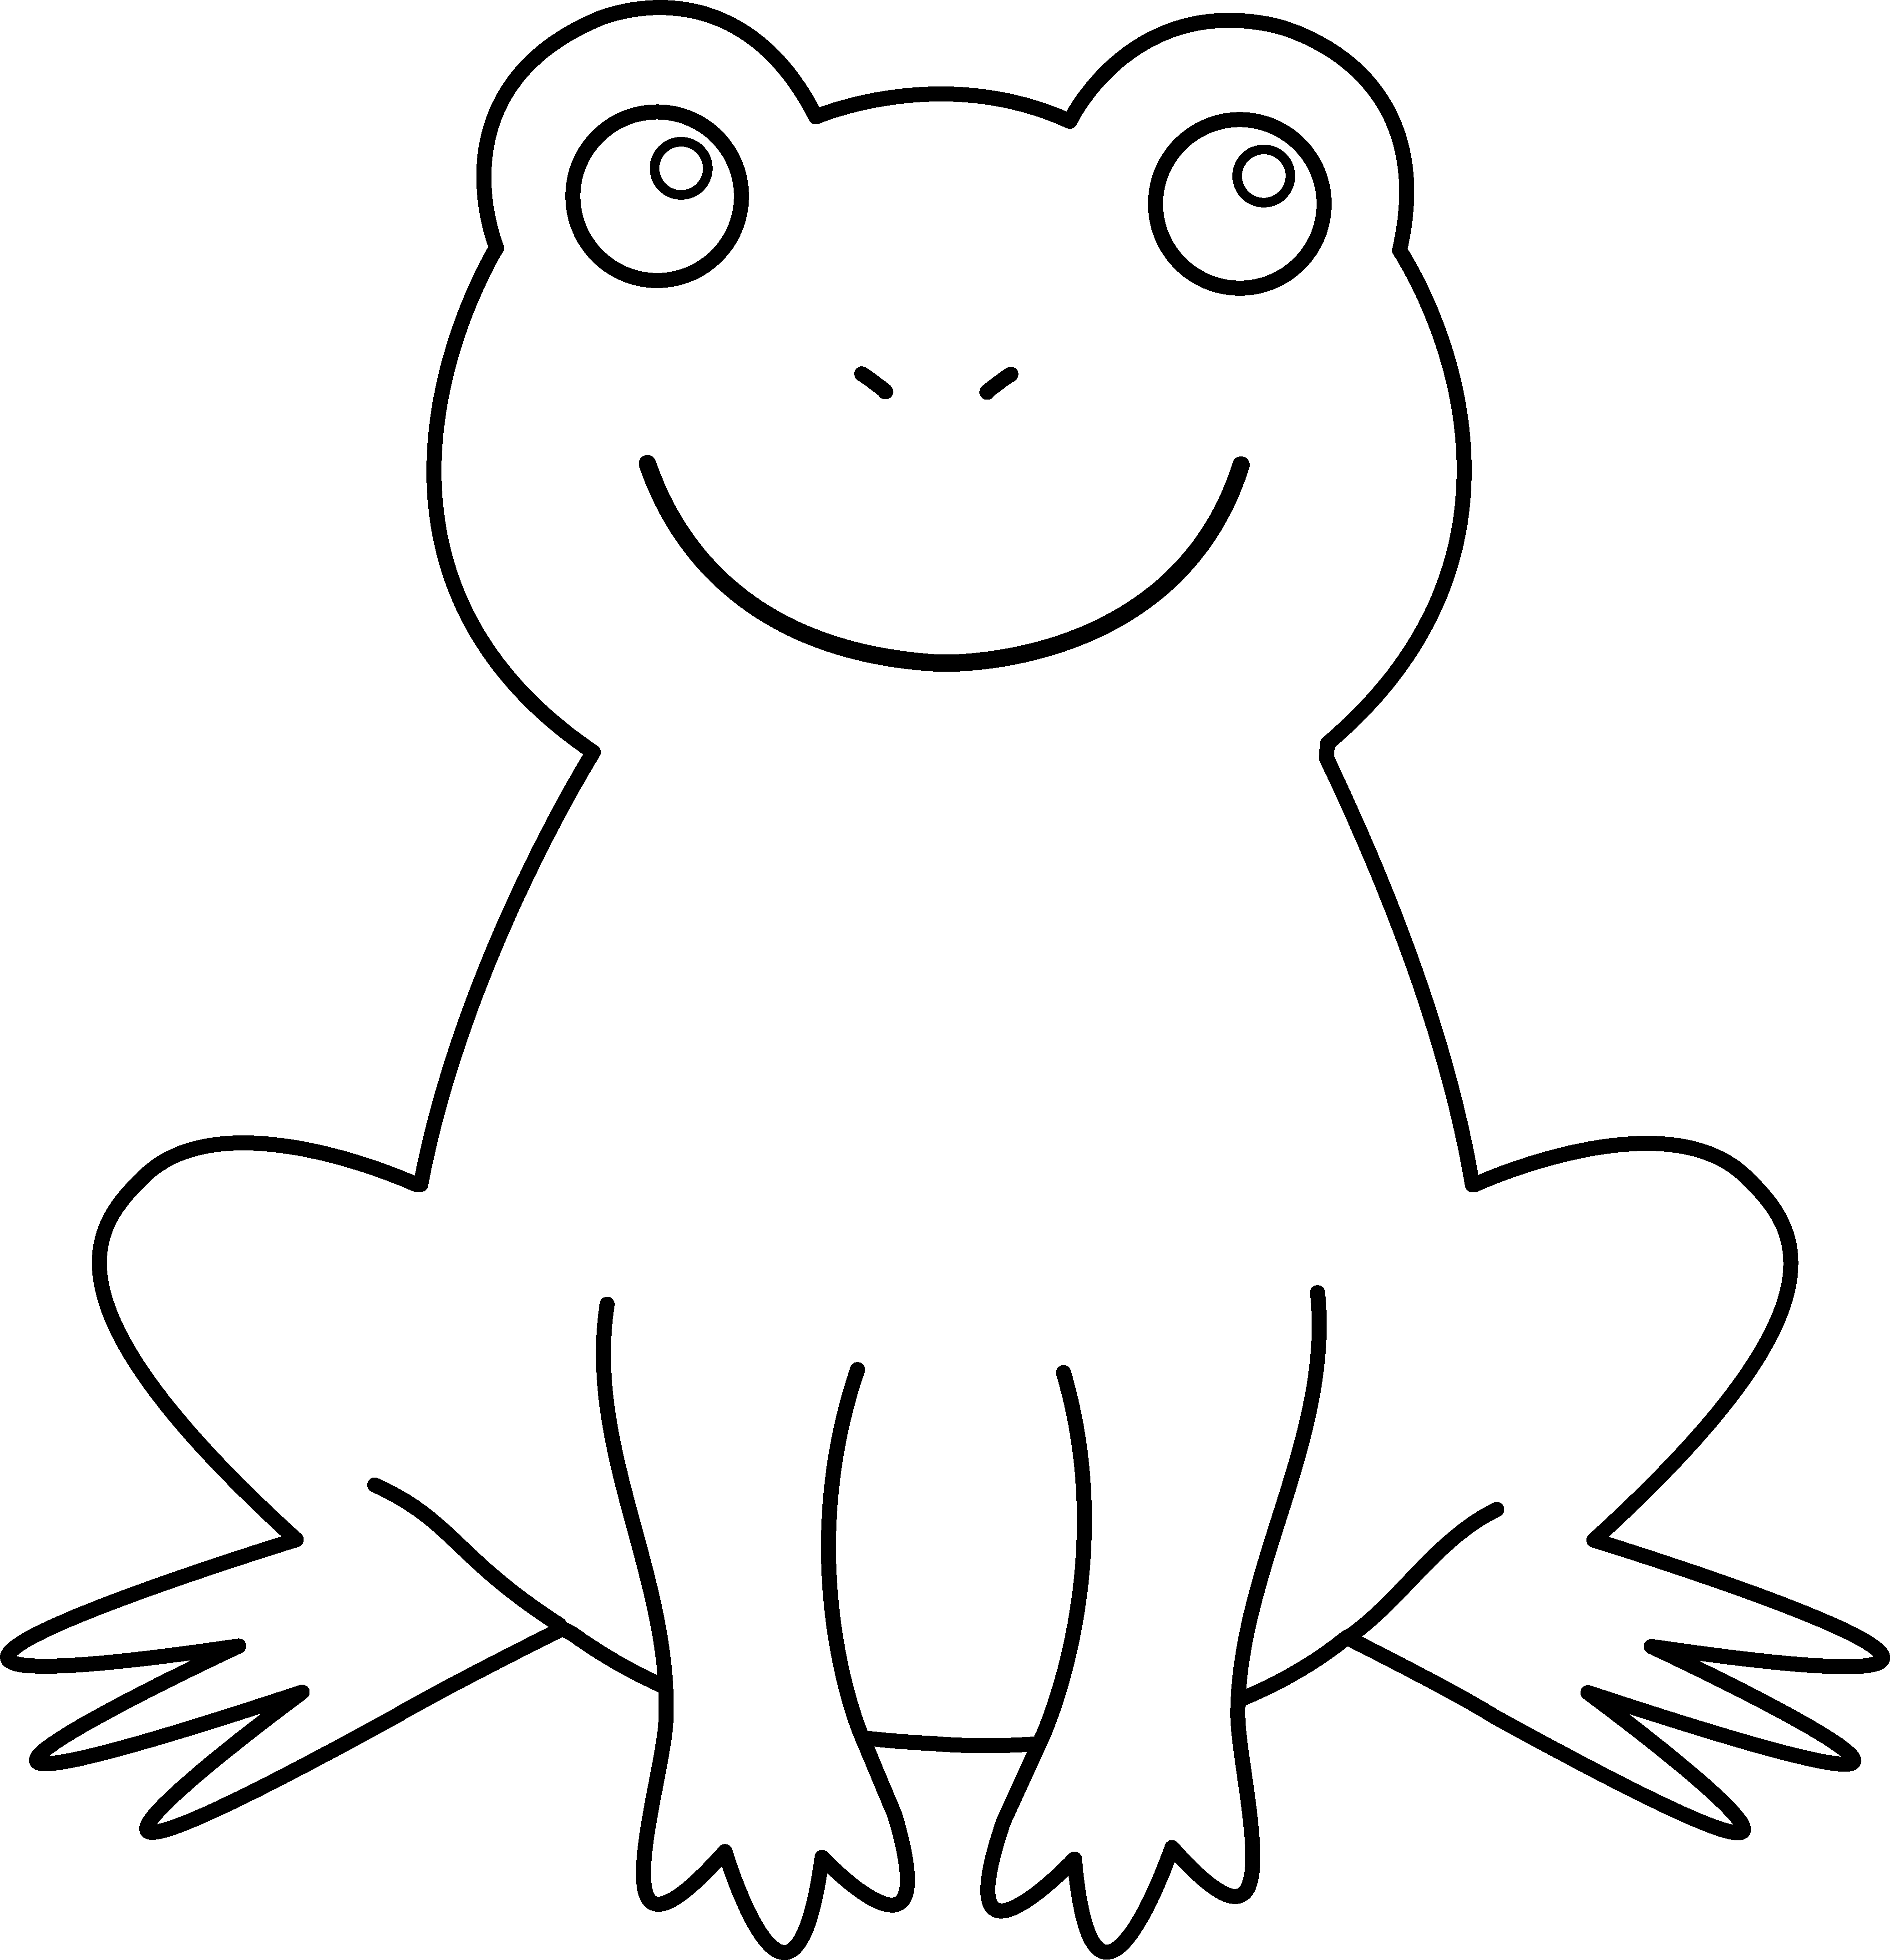 Black And White Frog - Black And White Frog, Transparent background PNG HD thumbnail